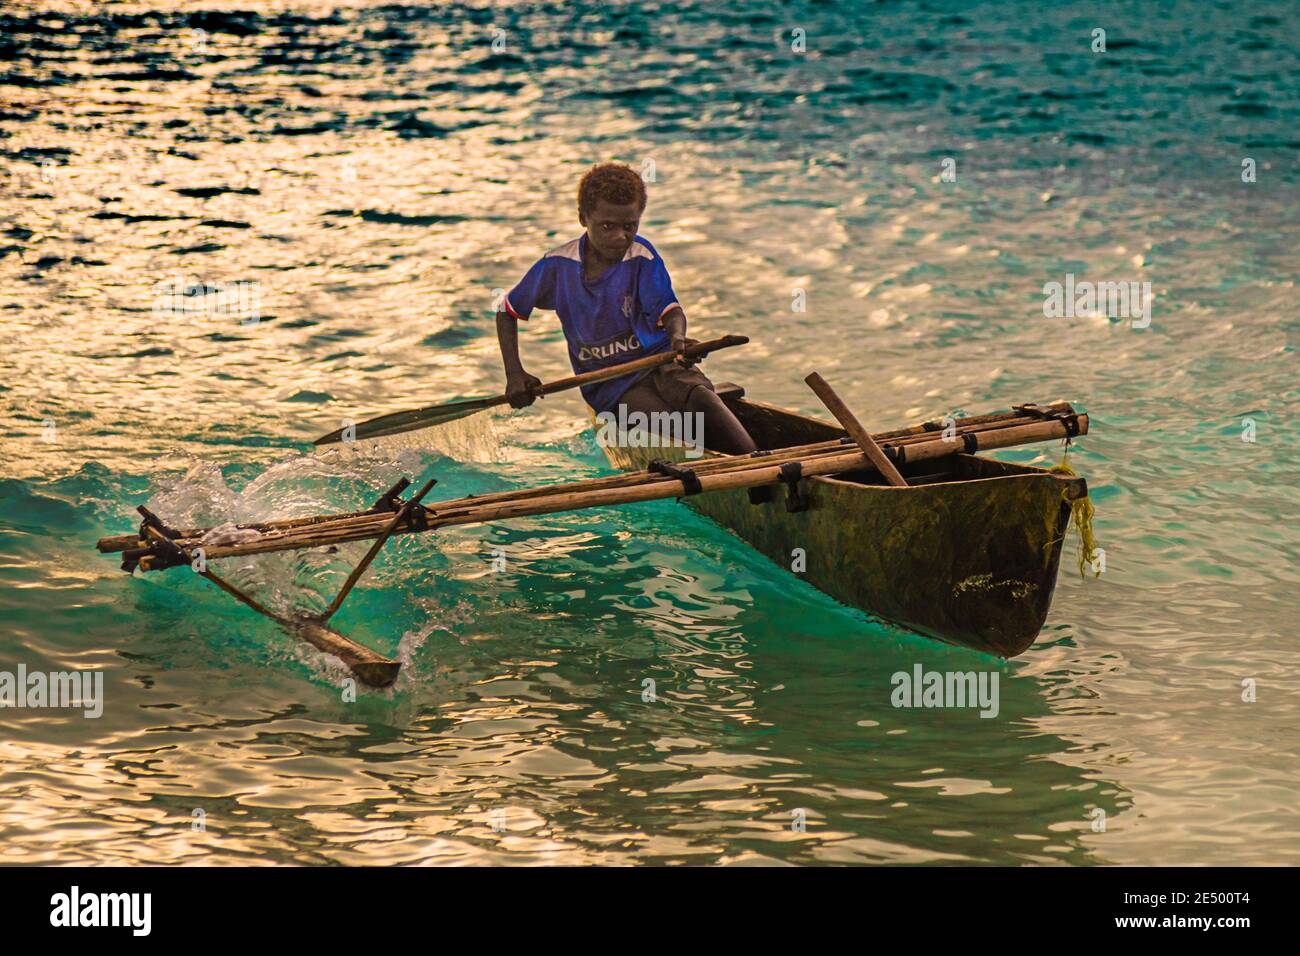 Young local surfs an outrigger canoe on Bougainville beach, Papua New Guinea Stock Photo